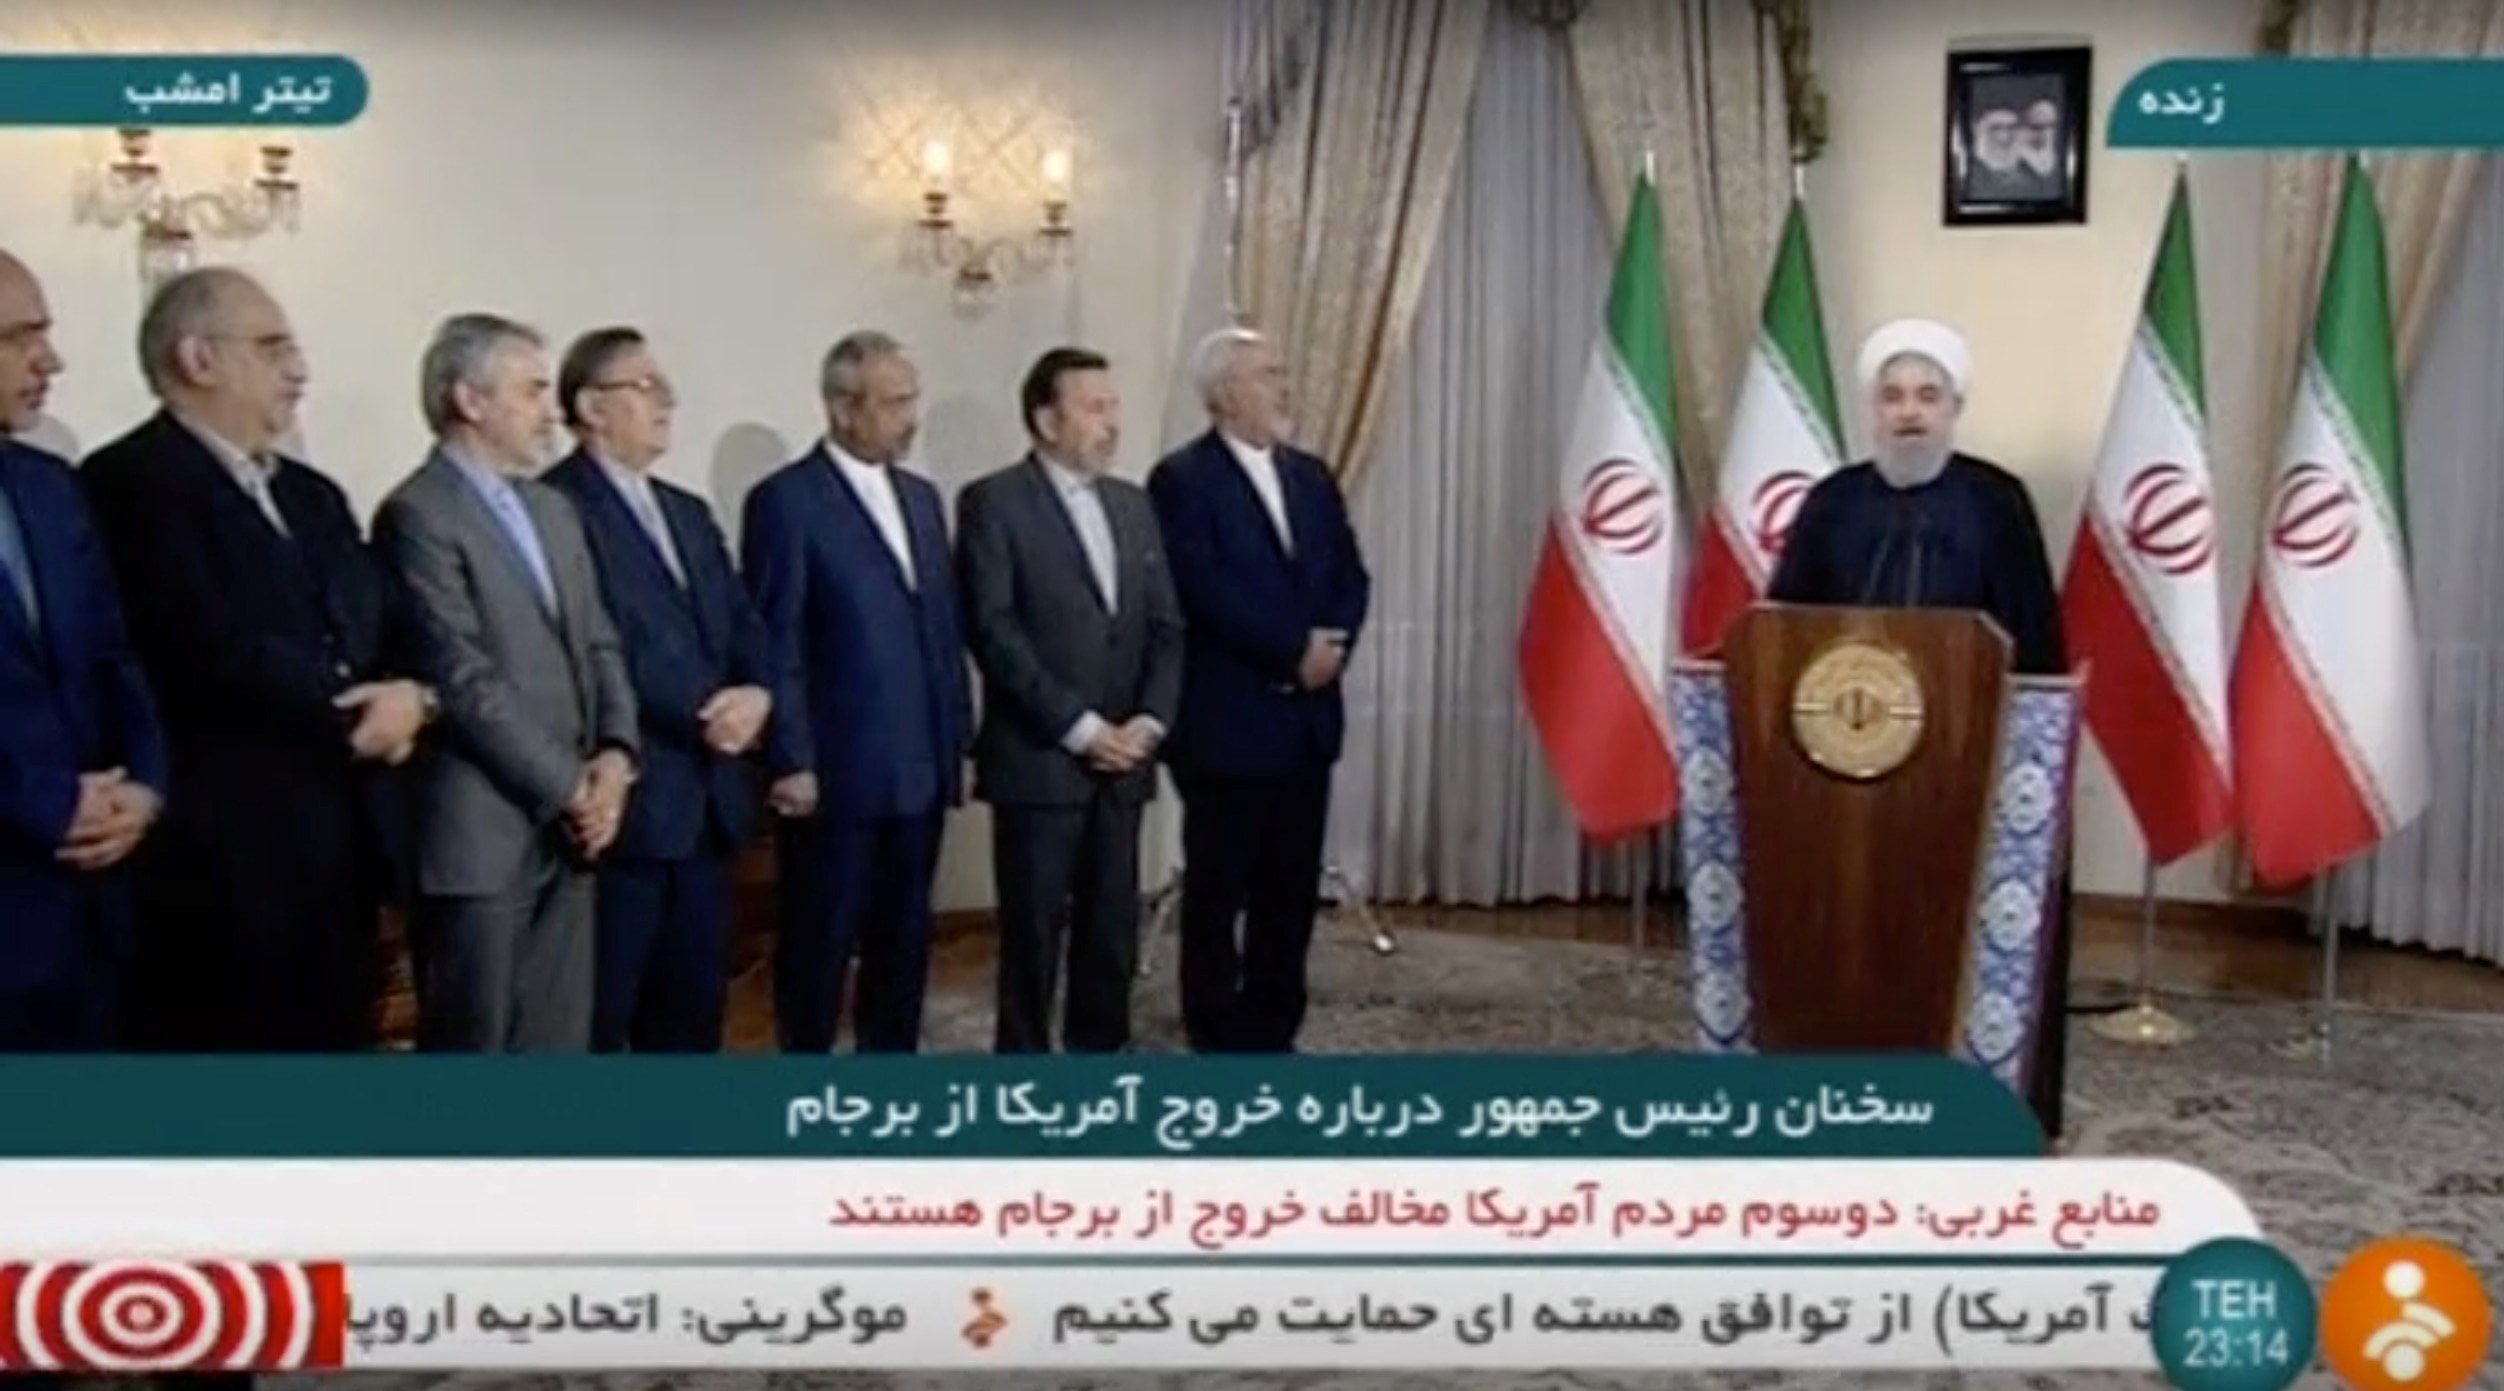 Iran’s President Rouhani speaks about the nuclear deal in Tehran